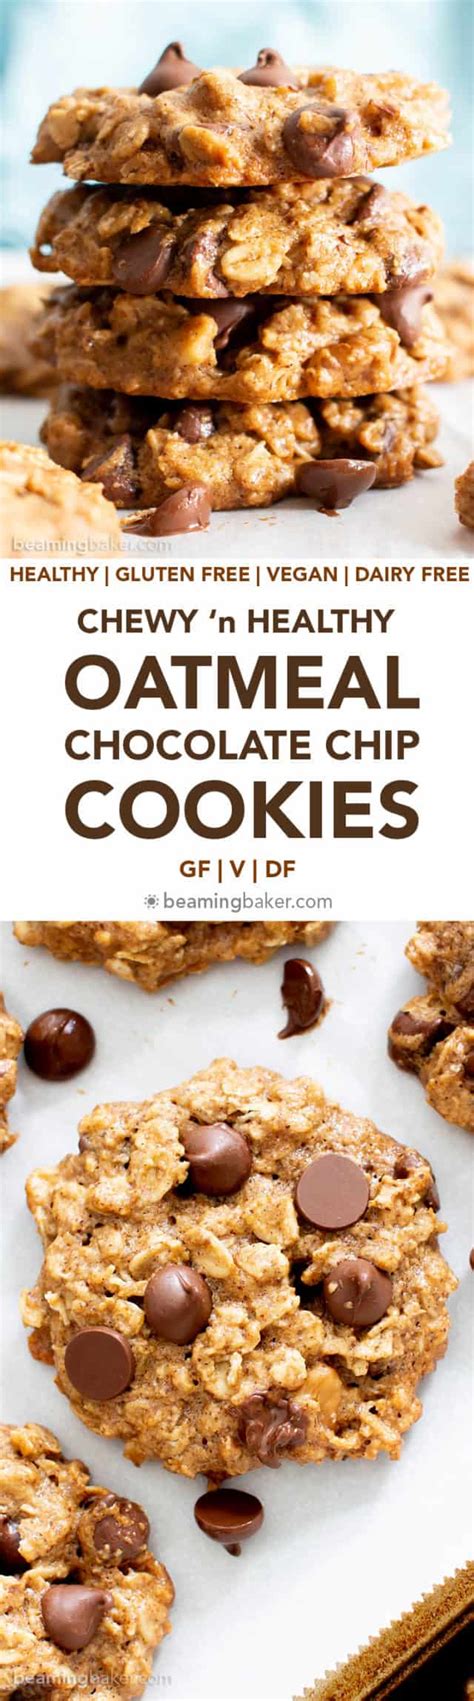 Easy Healthy Oatmeal Chocolate Chip Cookies Recipe Beaming Baker